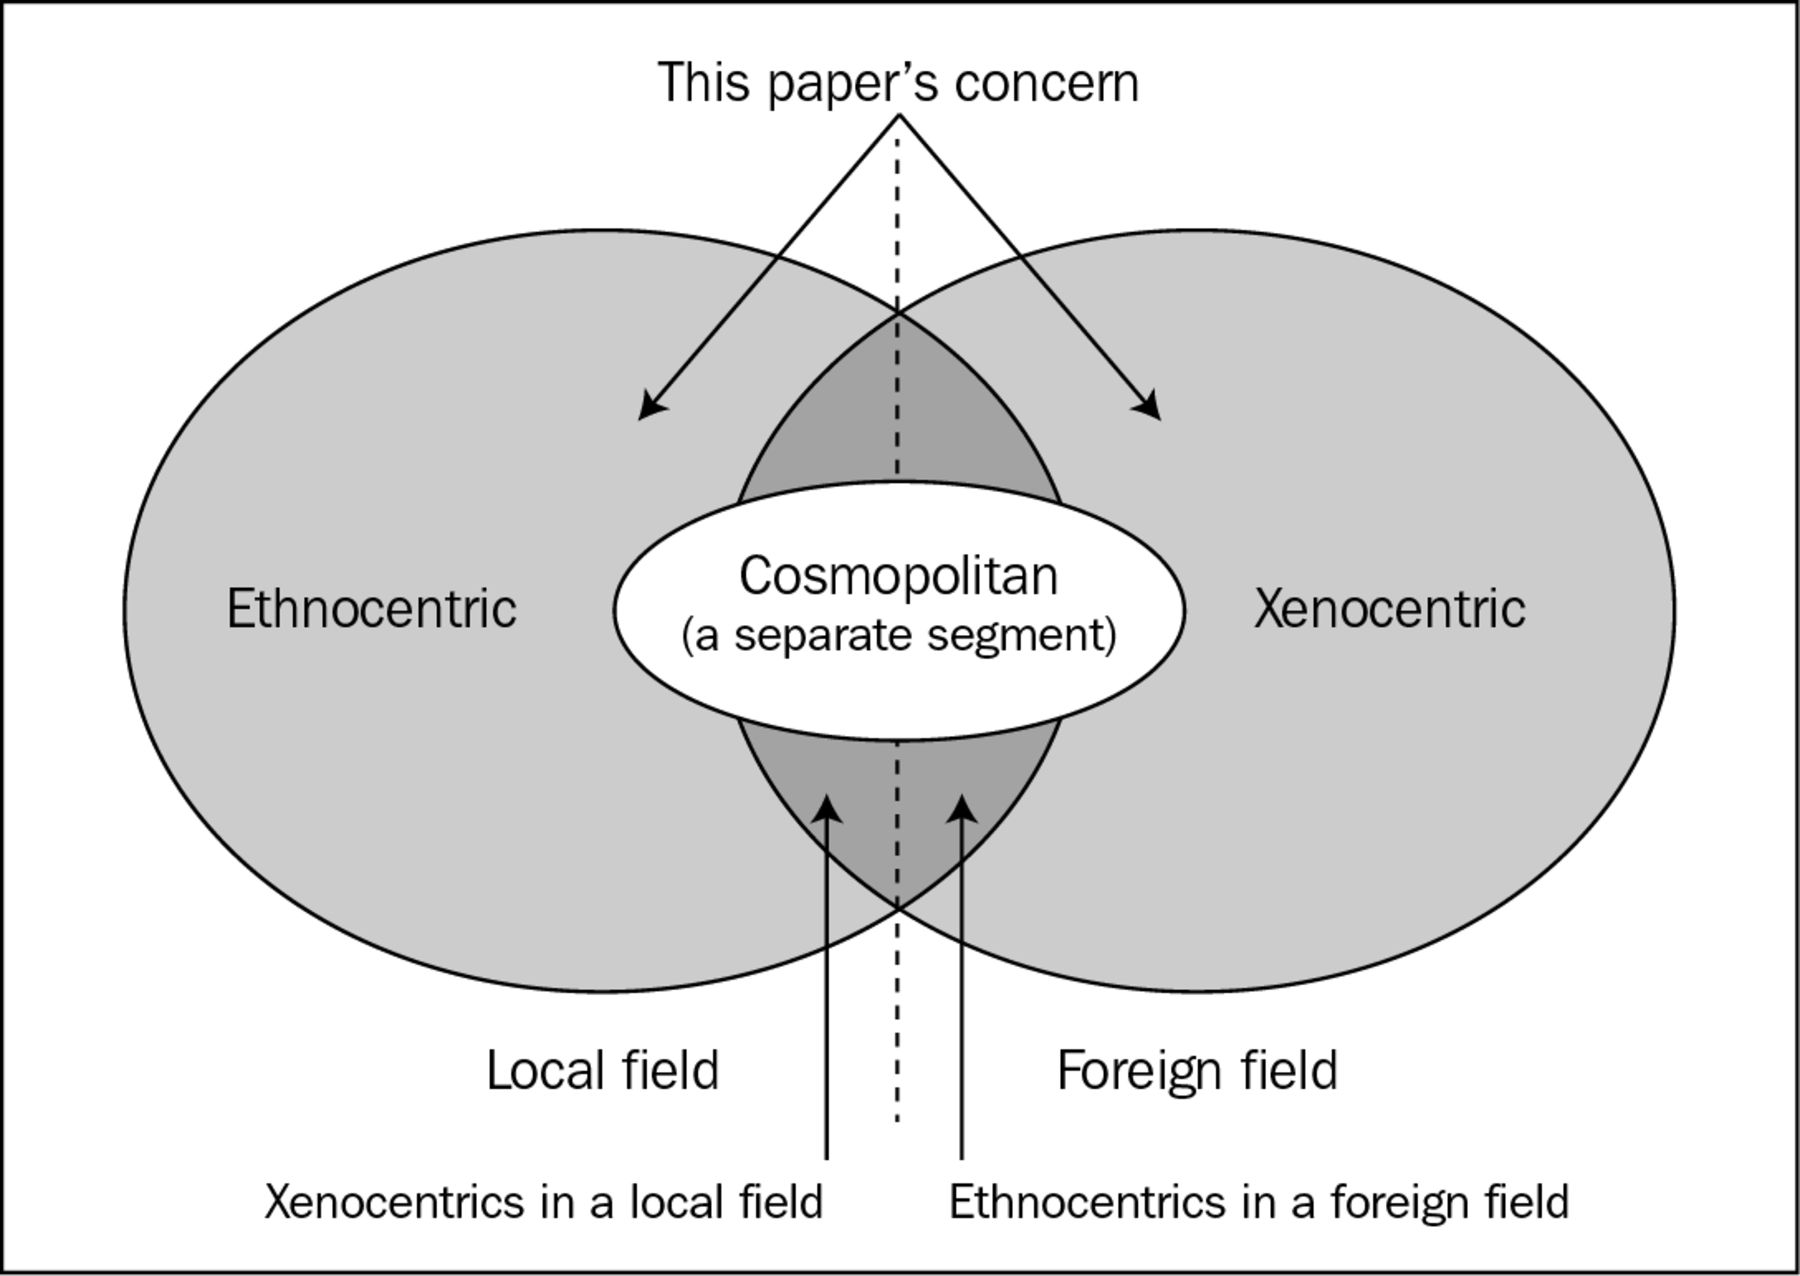 xenocentrism definition in sociology